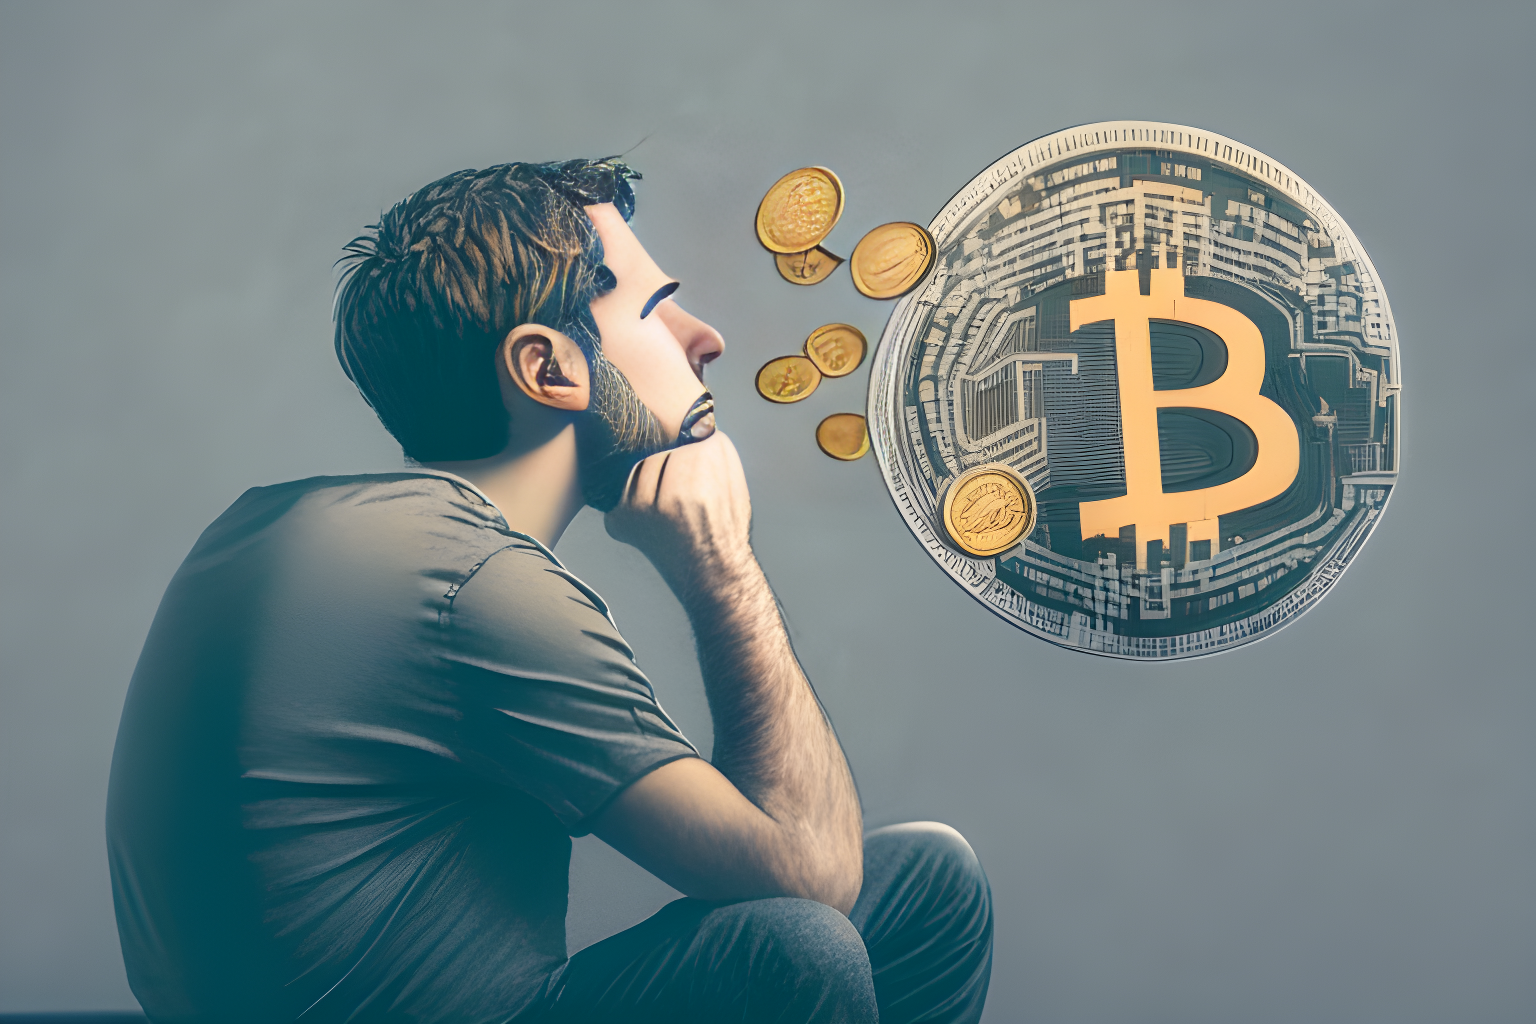 A man with a thought bubble thinking about crypto coins